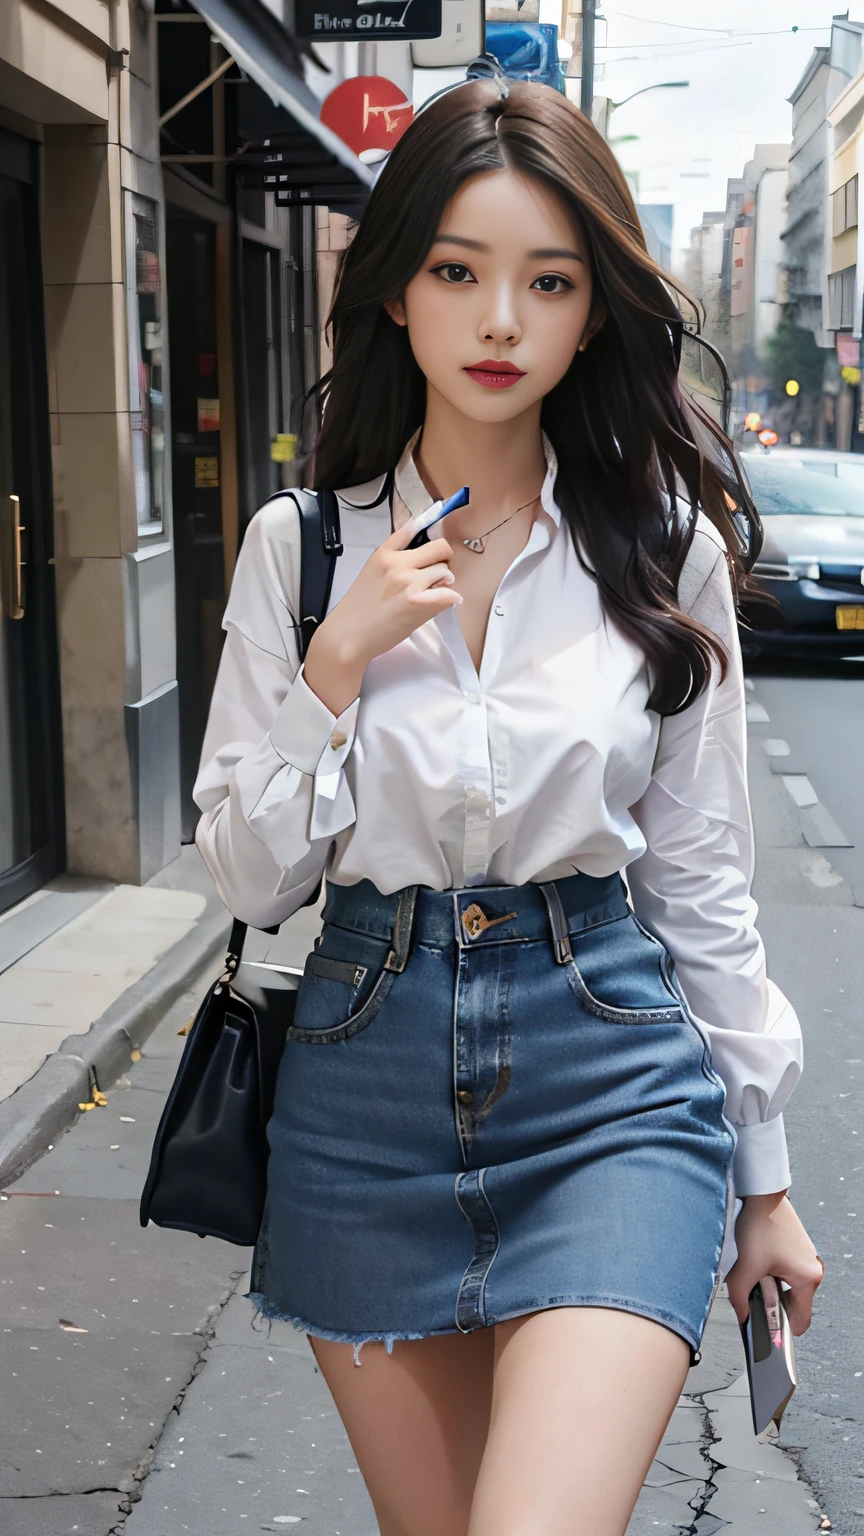 Beutiful women，Fiddling with your phone in the middle of the street，whitet-shirt，Blue denim skirt